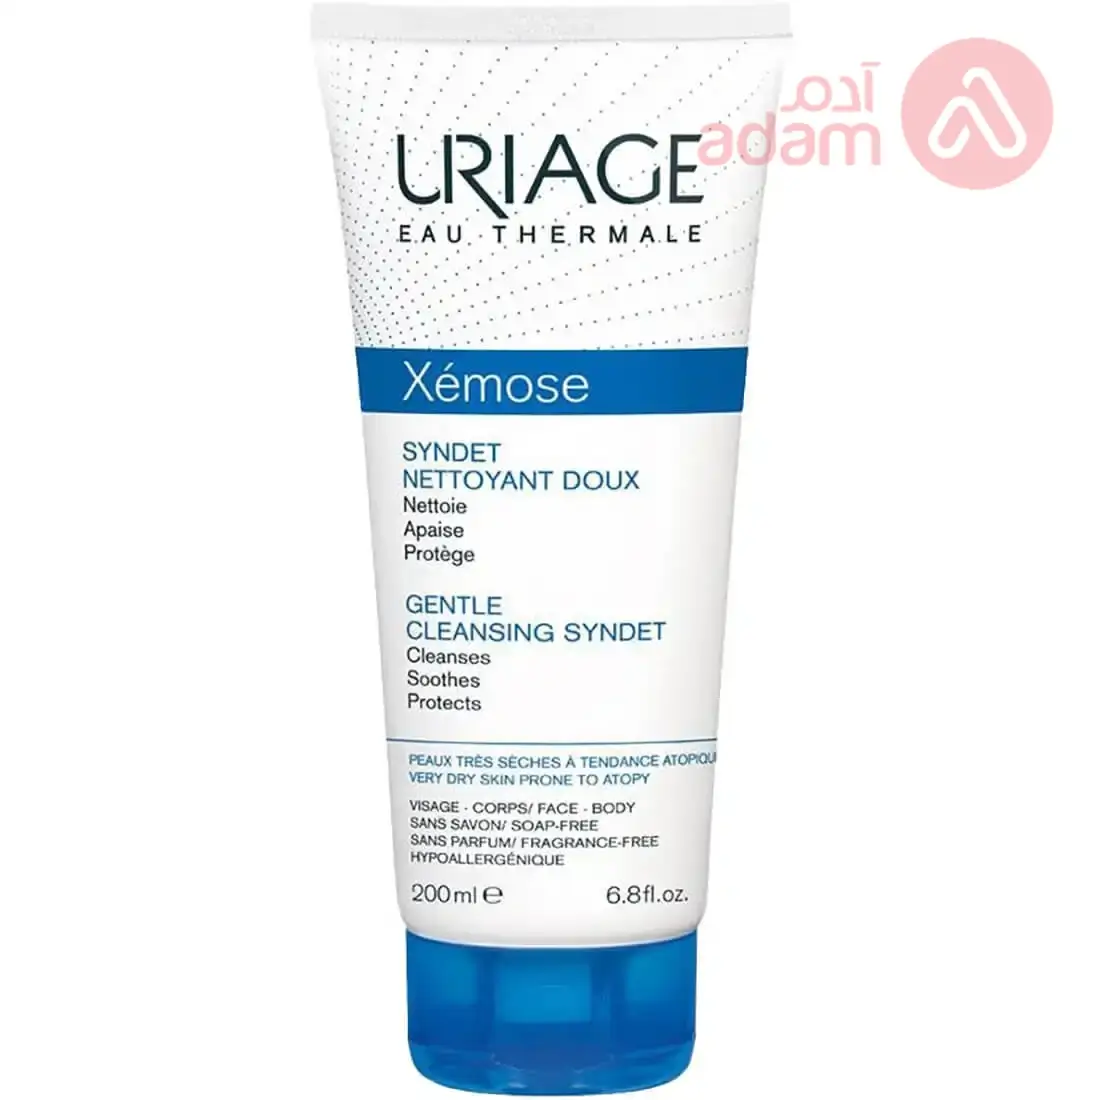 Uriage Xemose Gentle Cleanser Syndet | 200Ml